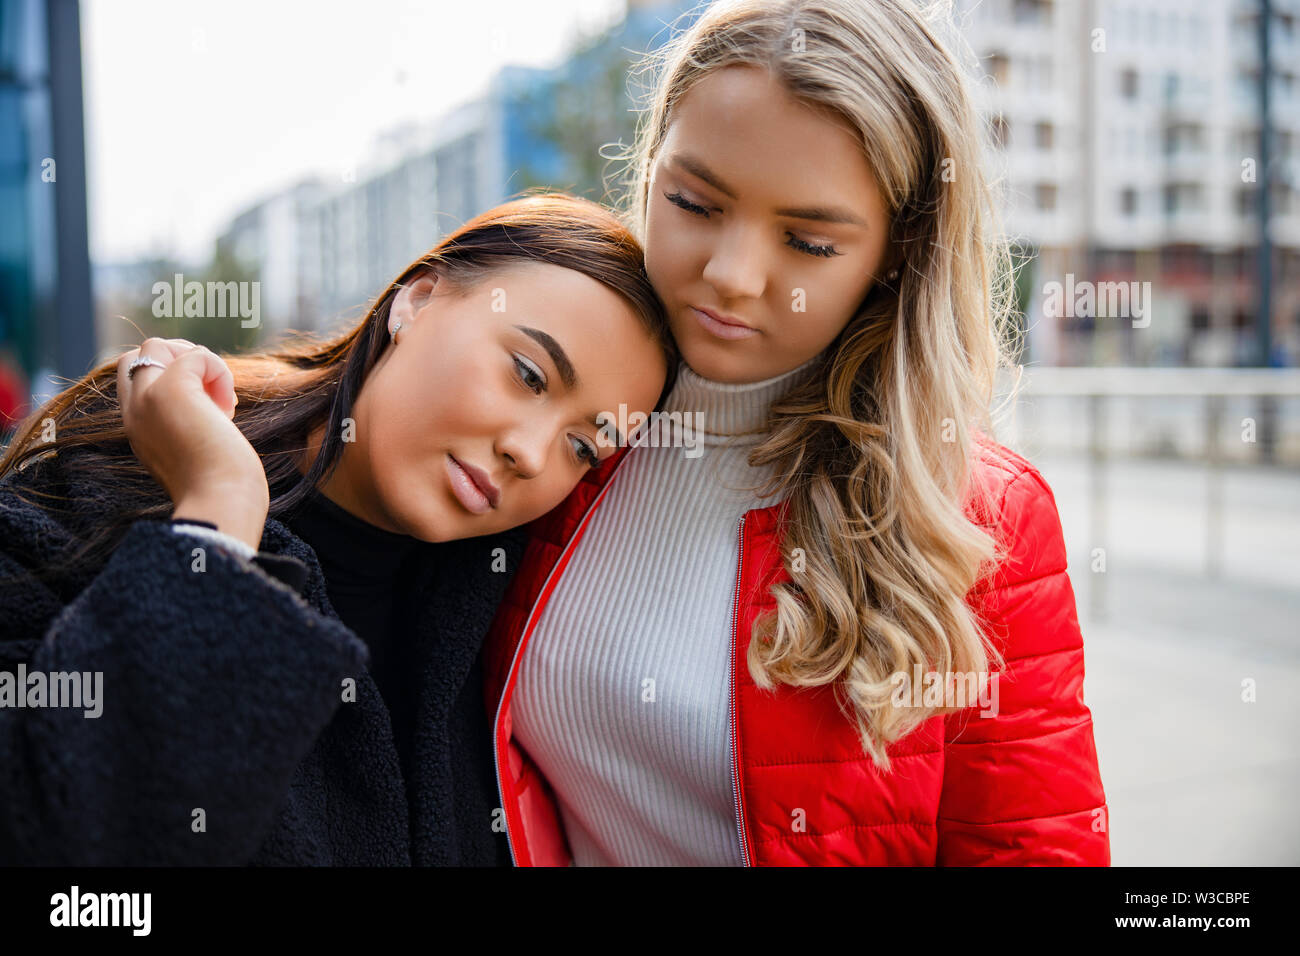 Caring Friend Consoling Unhappy Young Woman In City Stock Photo